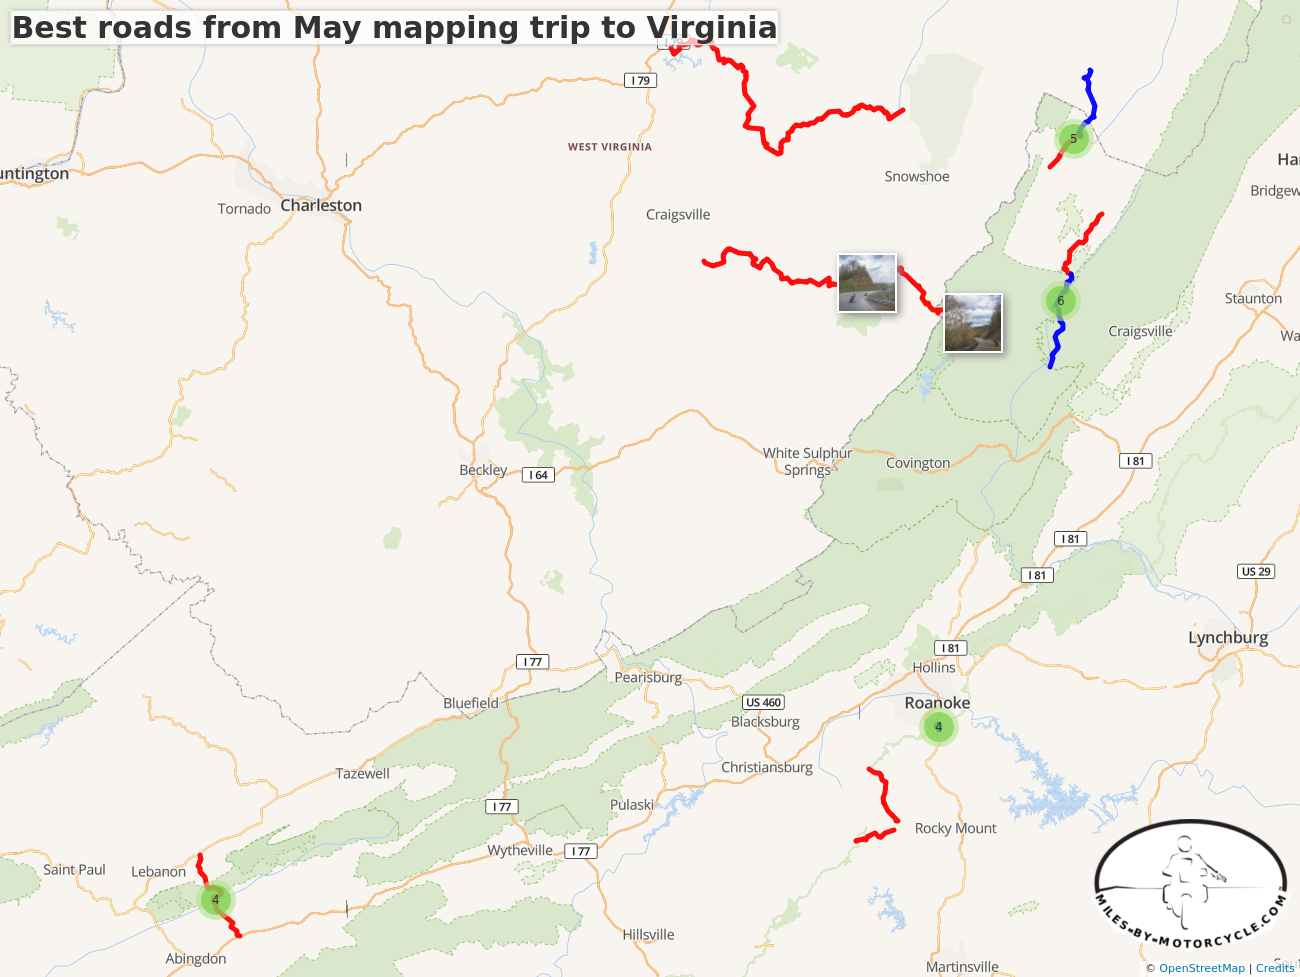 Best roads from May mapping trip to Virginia